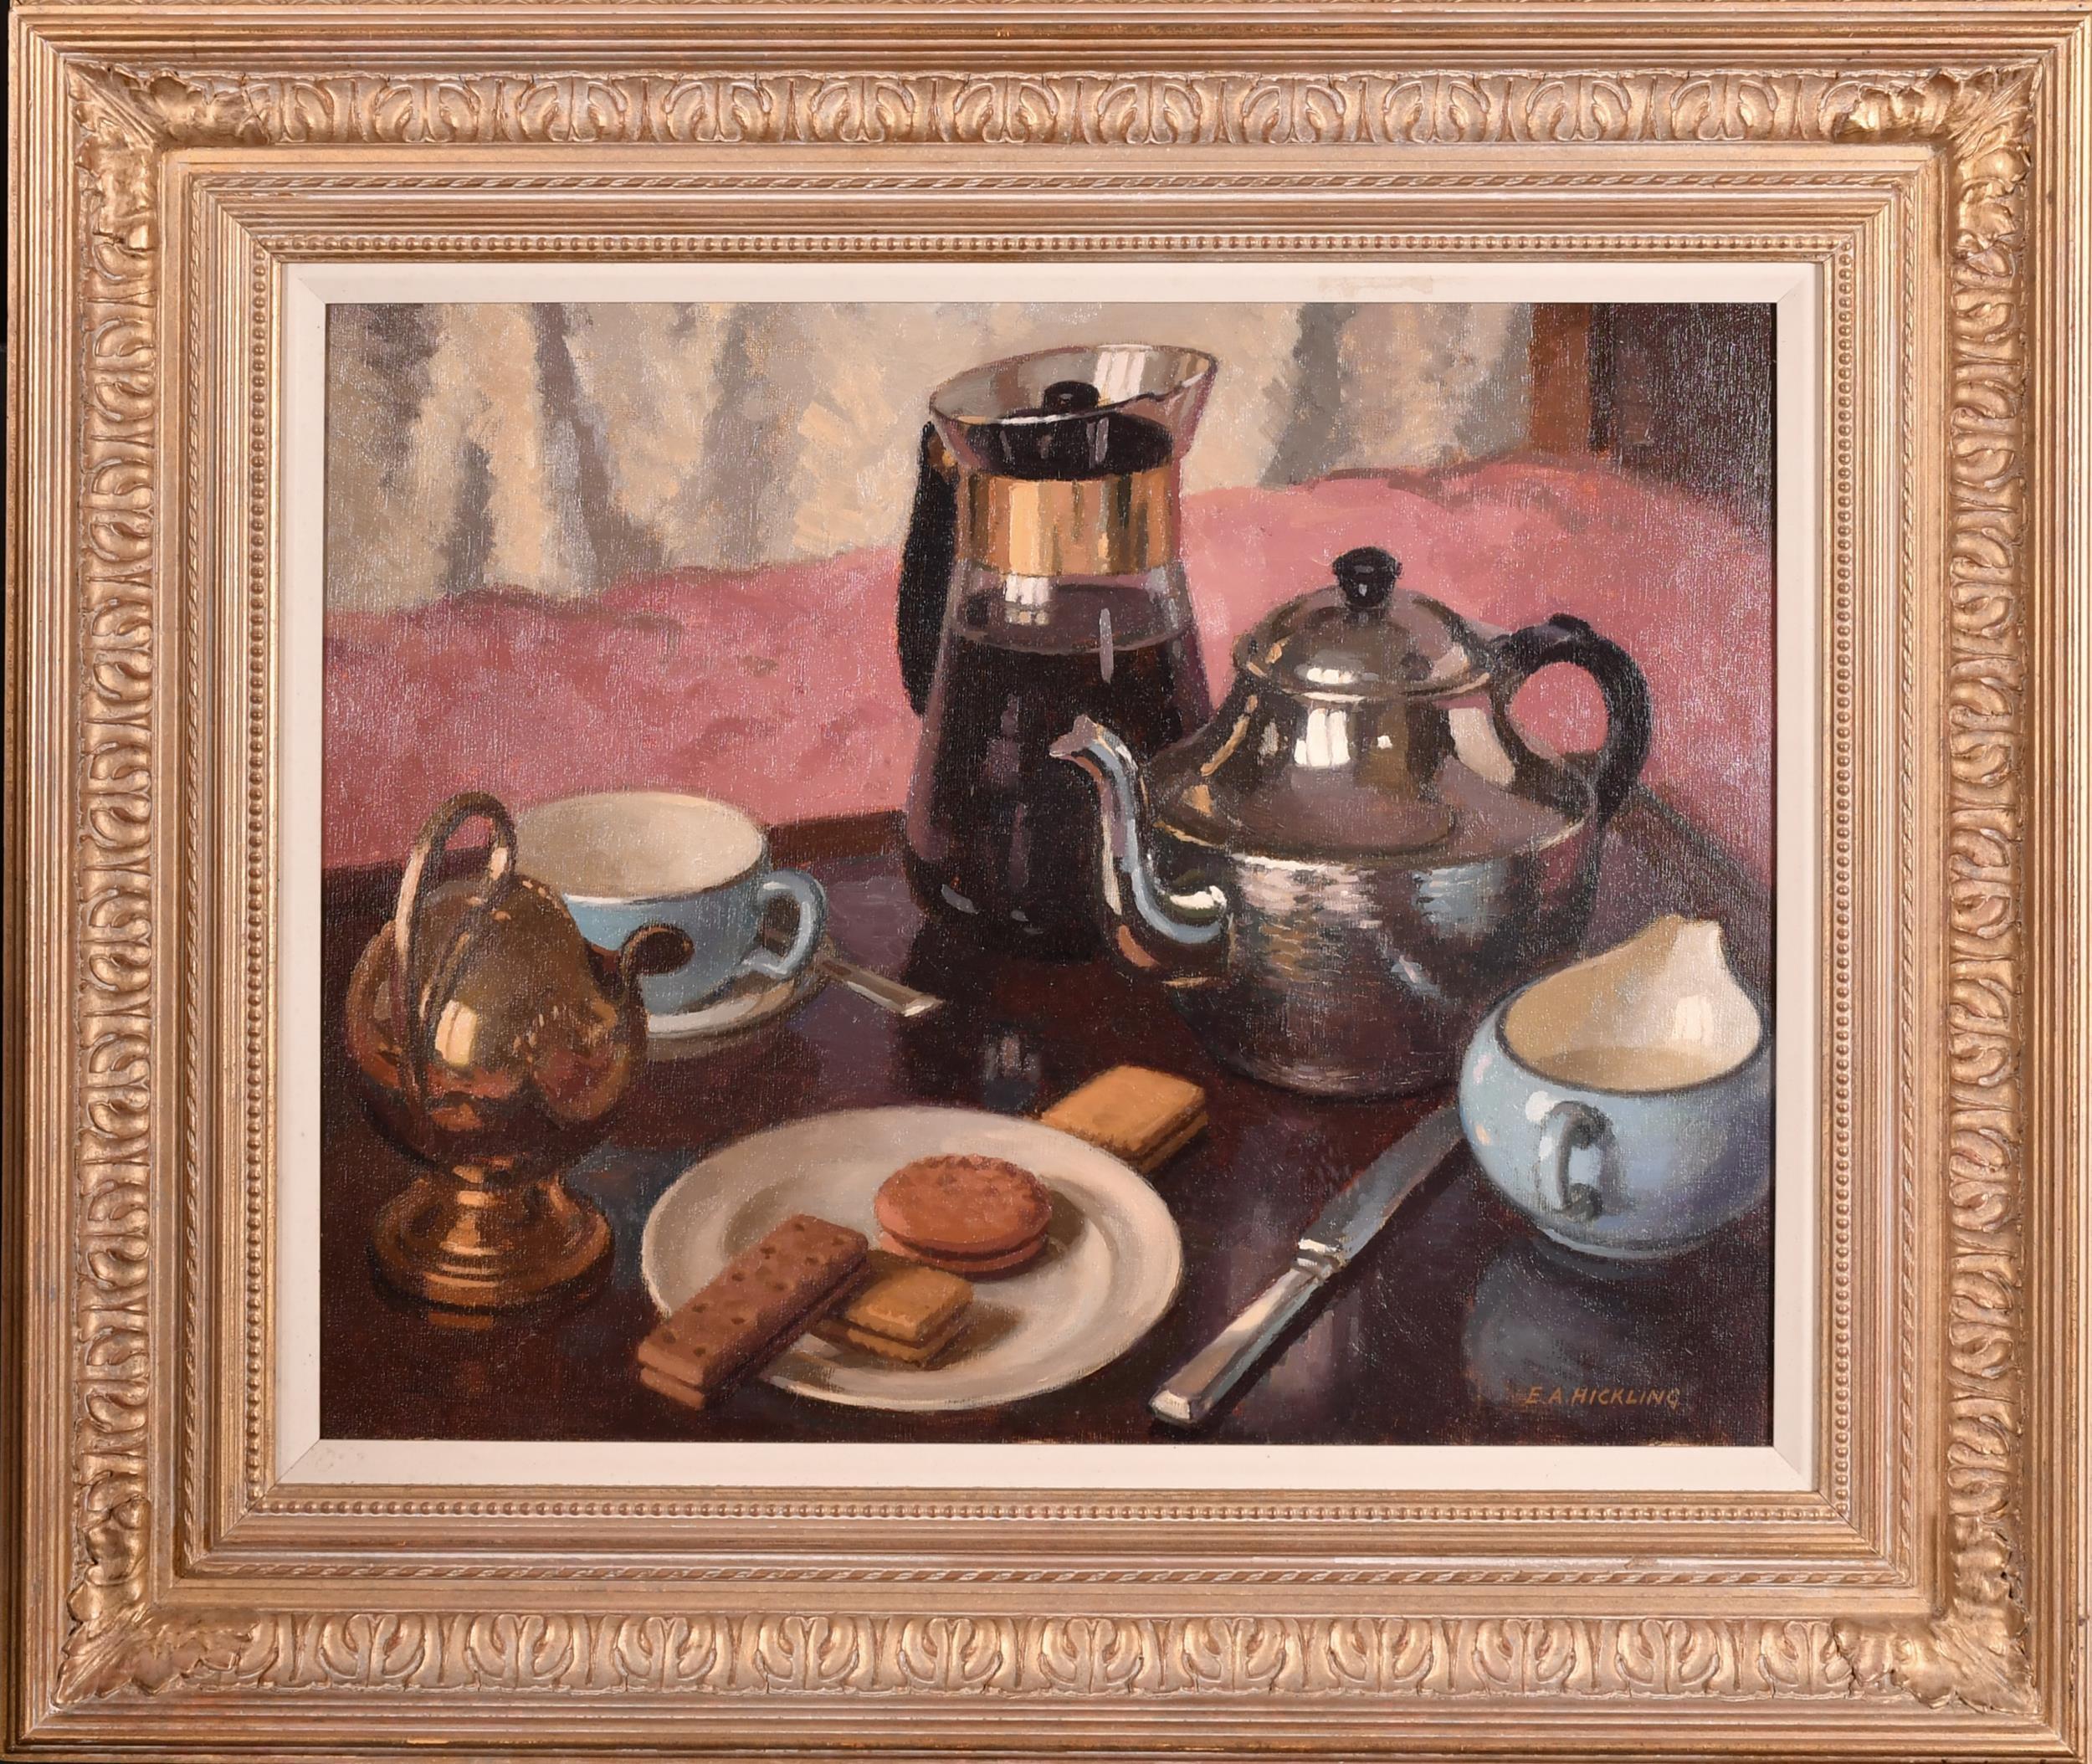 Tea or Coffee - Mid 20th Century English Still Life Oil on Board Painting For Sale 6